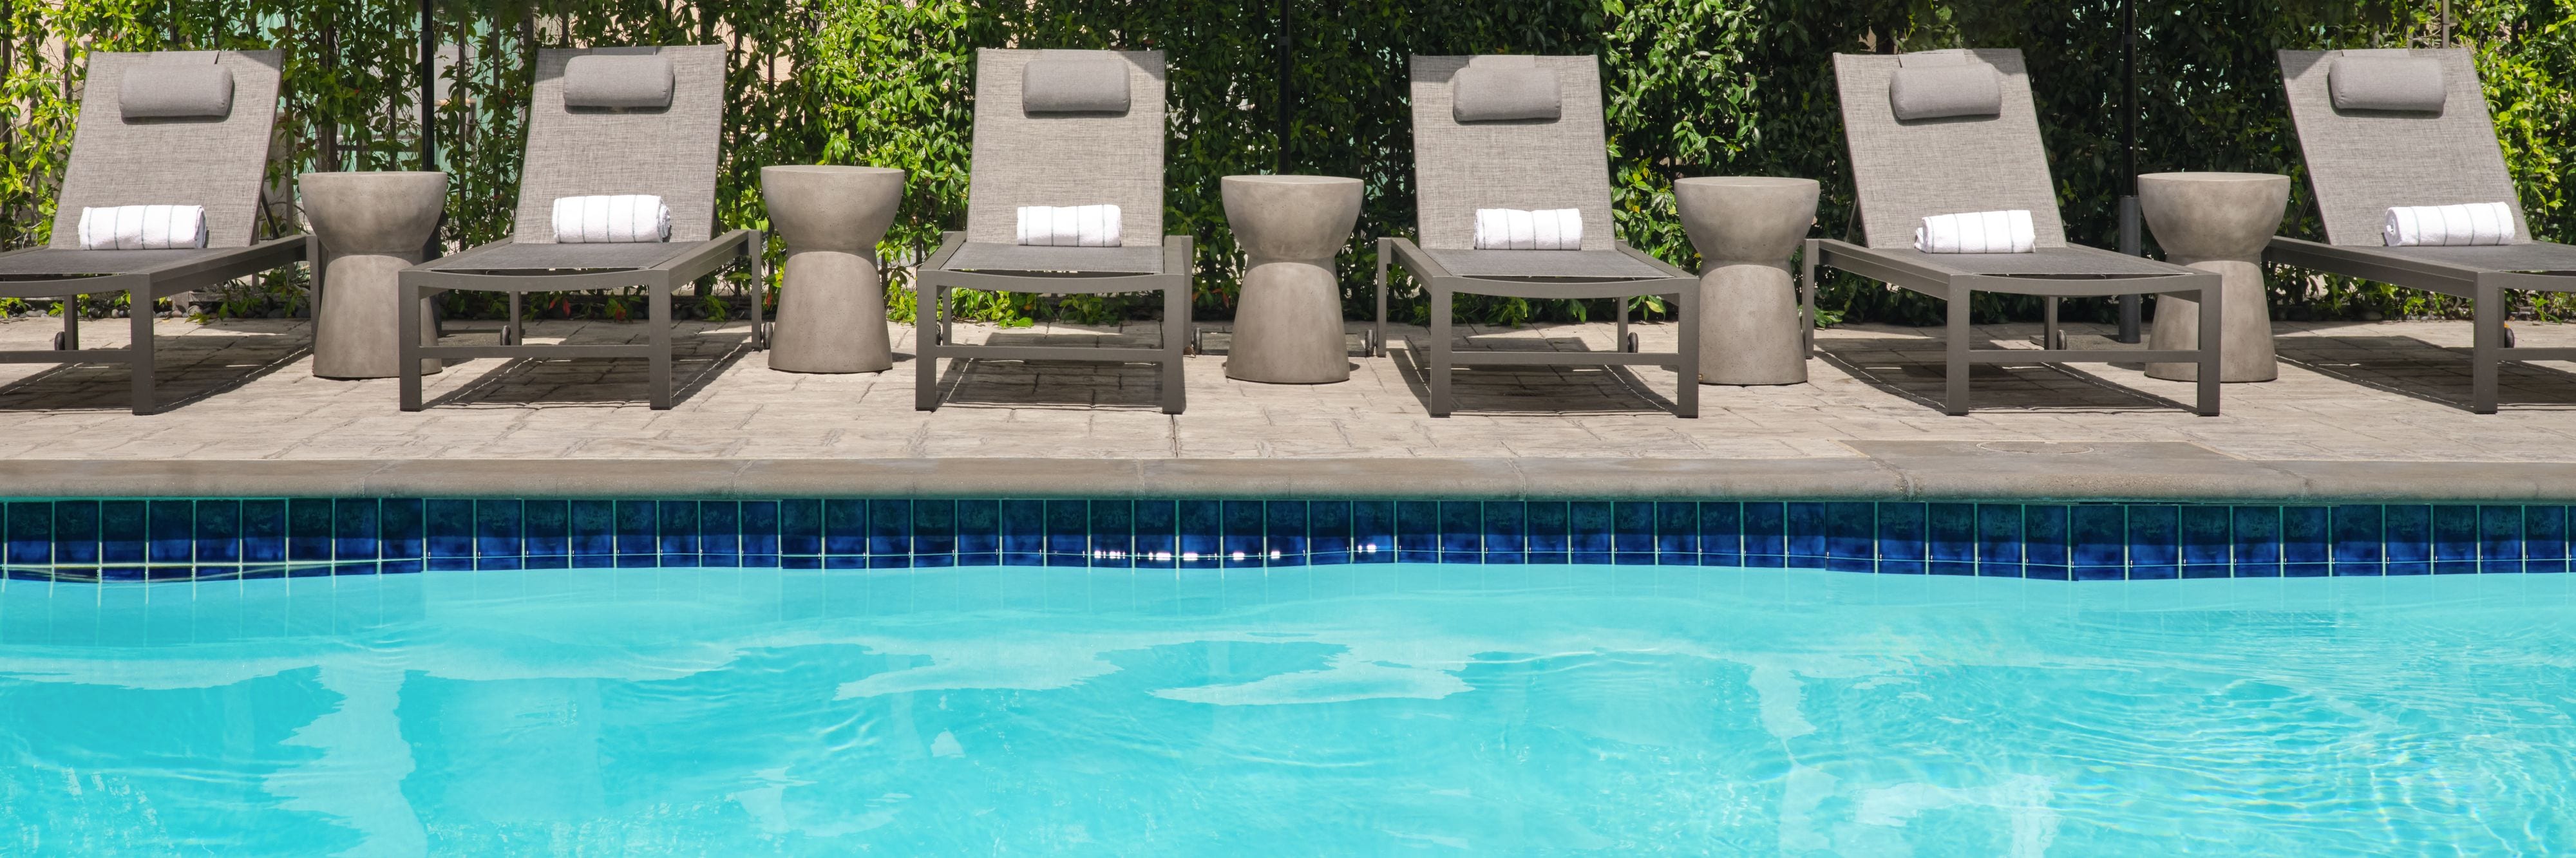 Outdoor Pool - Lounge Chairs